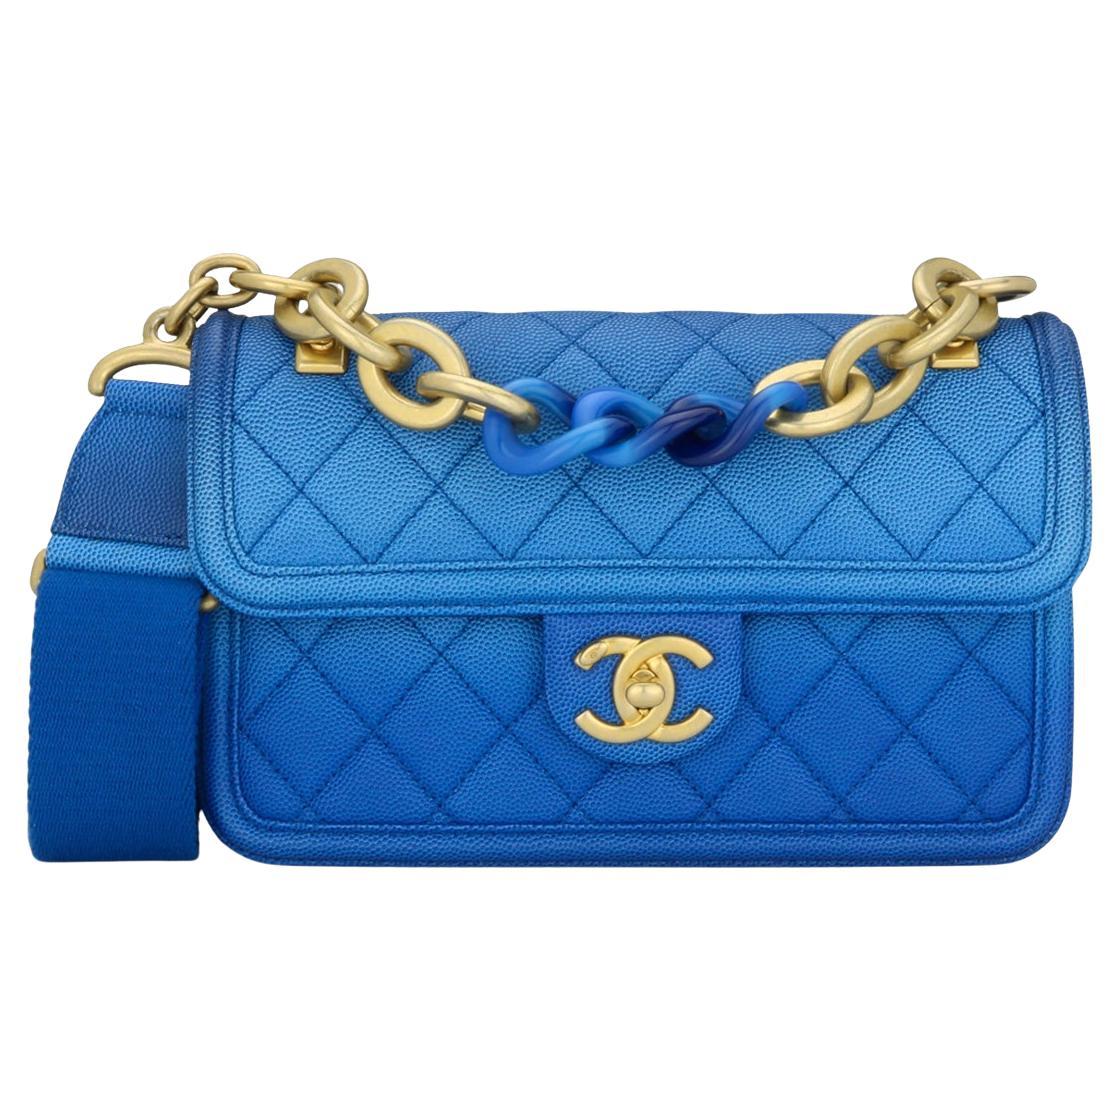 CHANEL Sunset On The Sea Flap Bag Blue Caviar with Brushed Gold Hardware 2019 For Sale